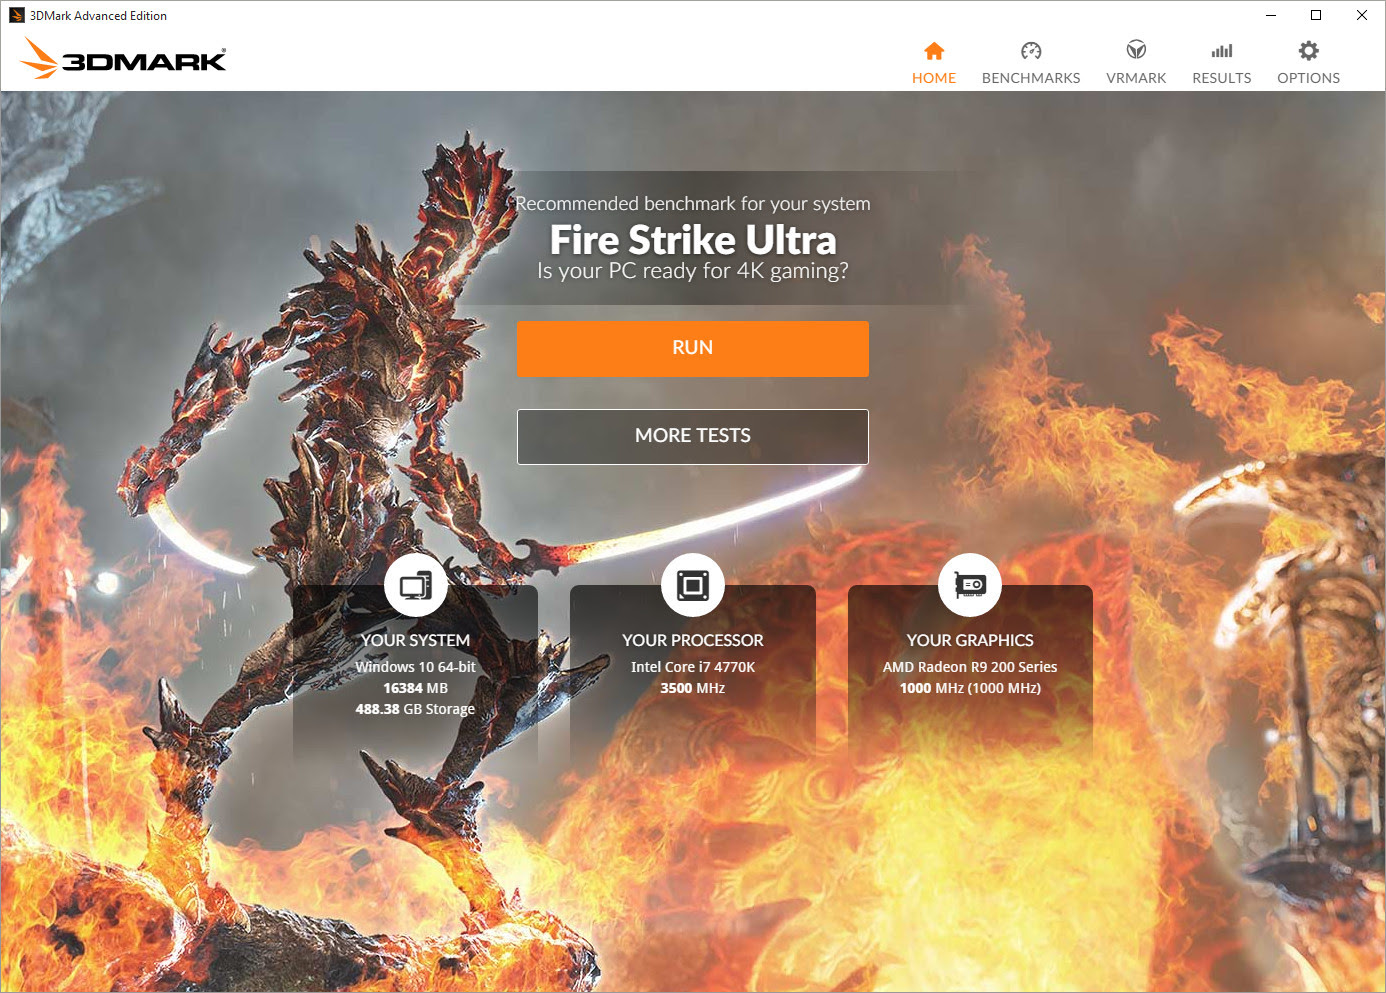 3DMark Home screen interface for 2016